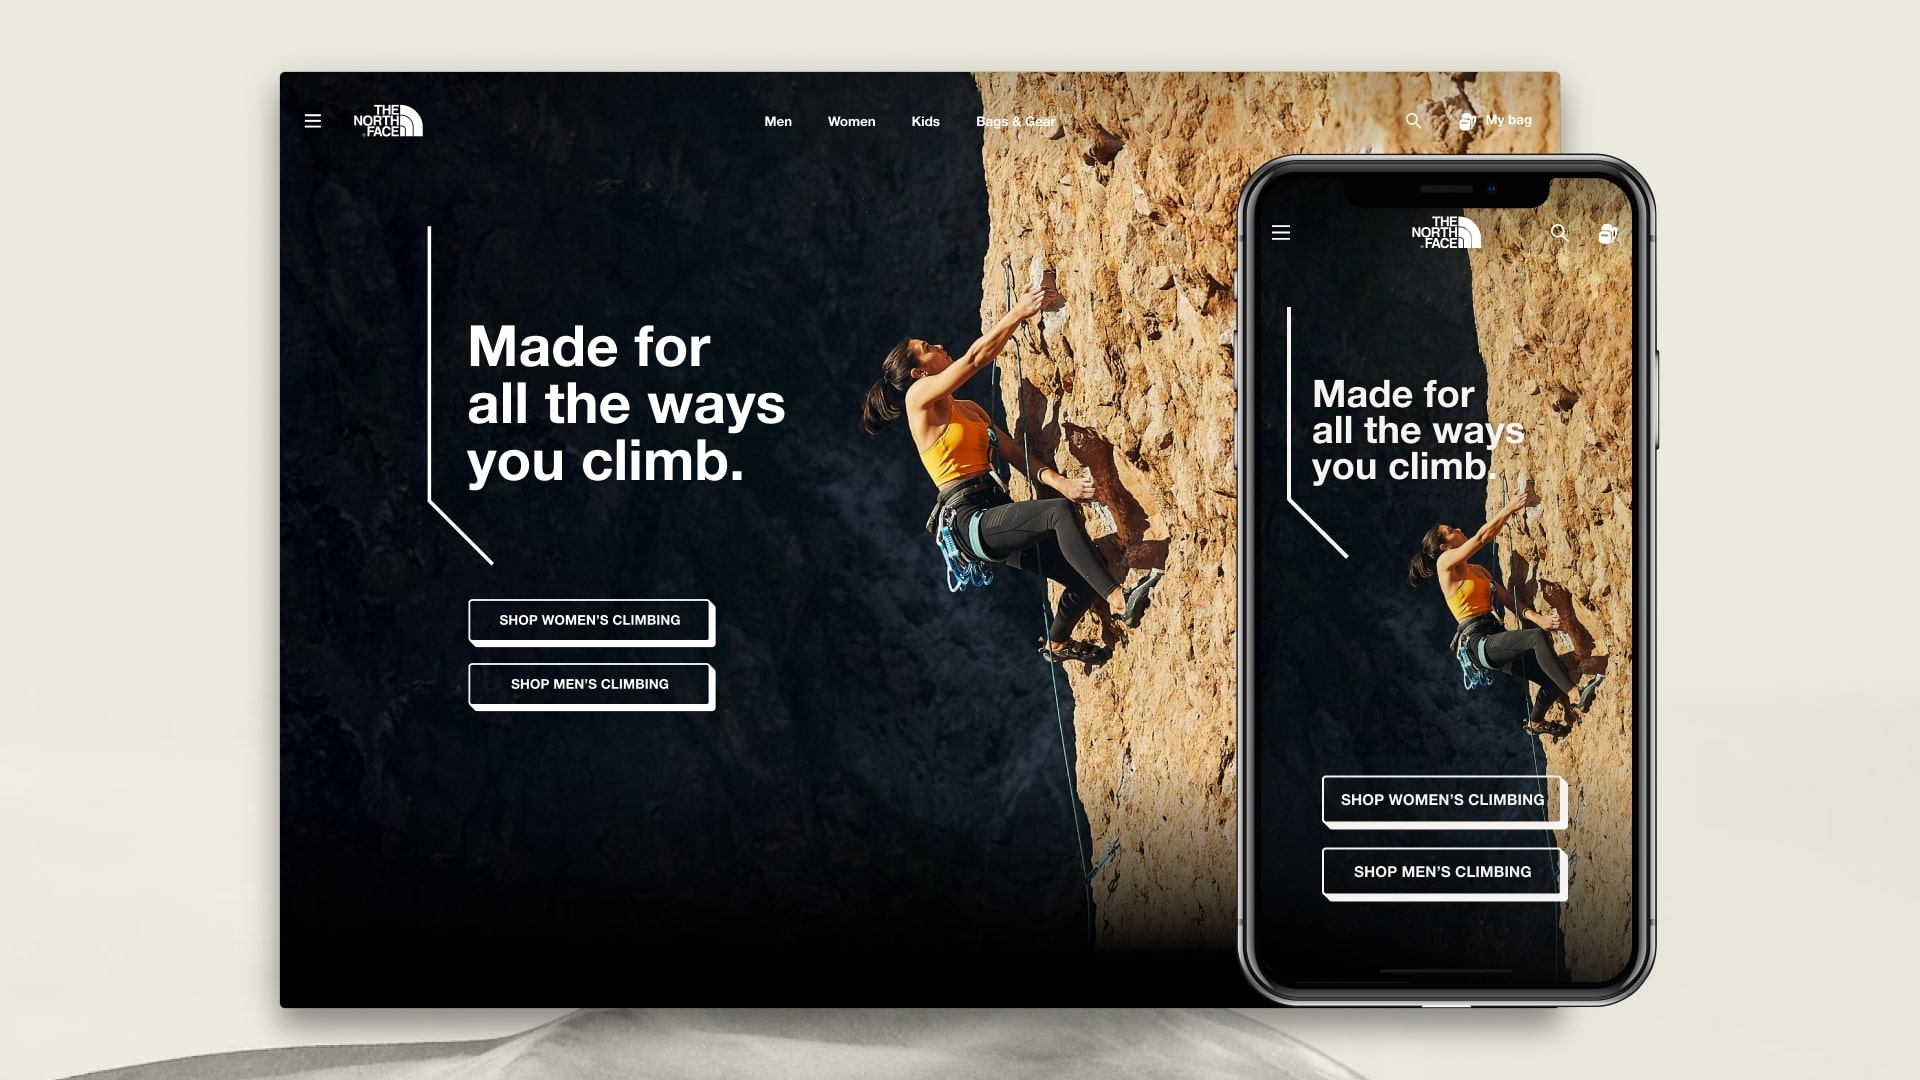 UI Redesign porting over TNF's in-store visual language to their web presence.